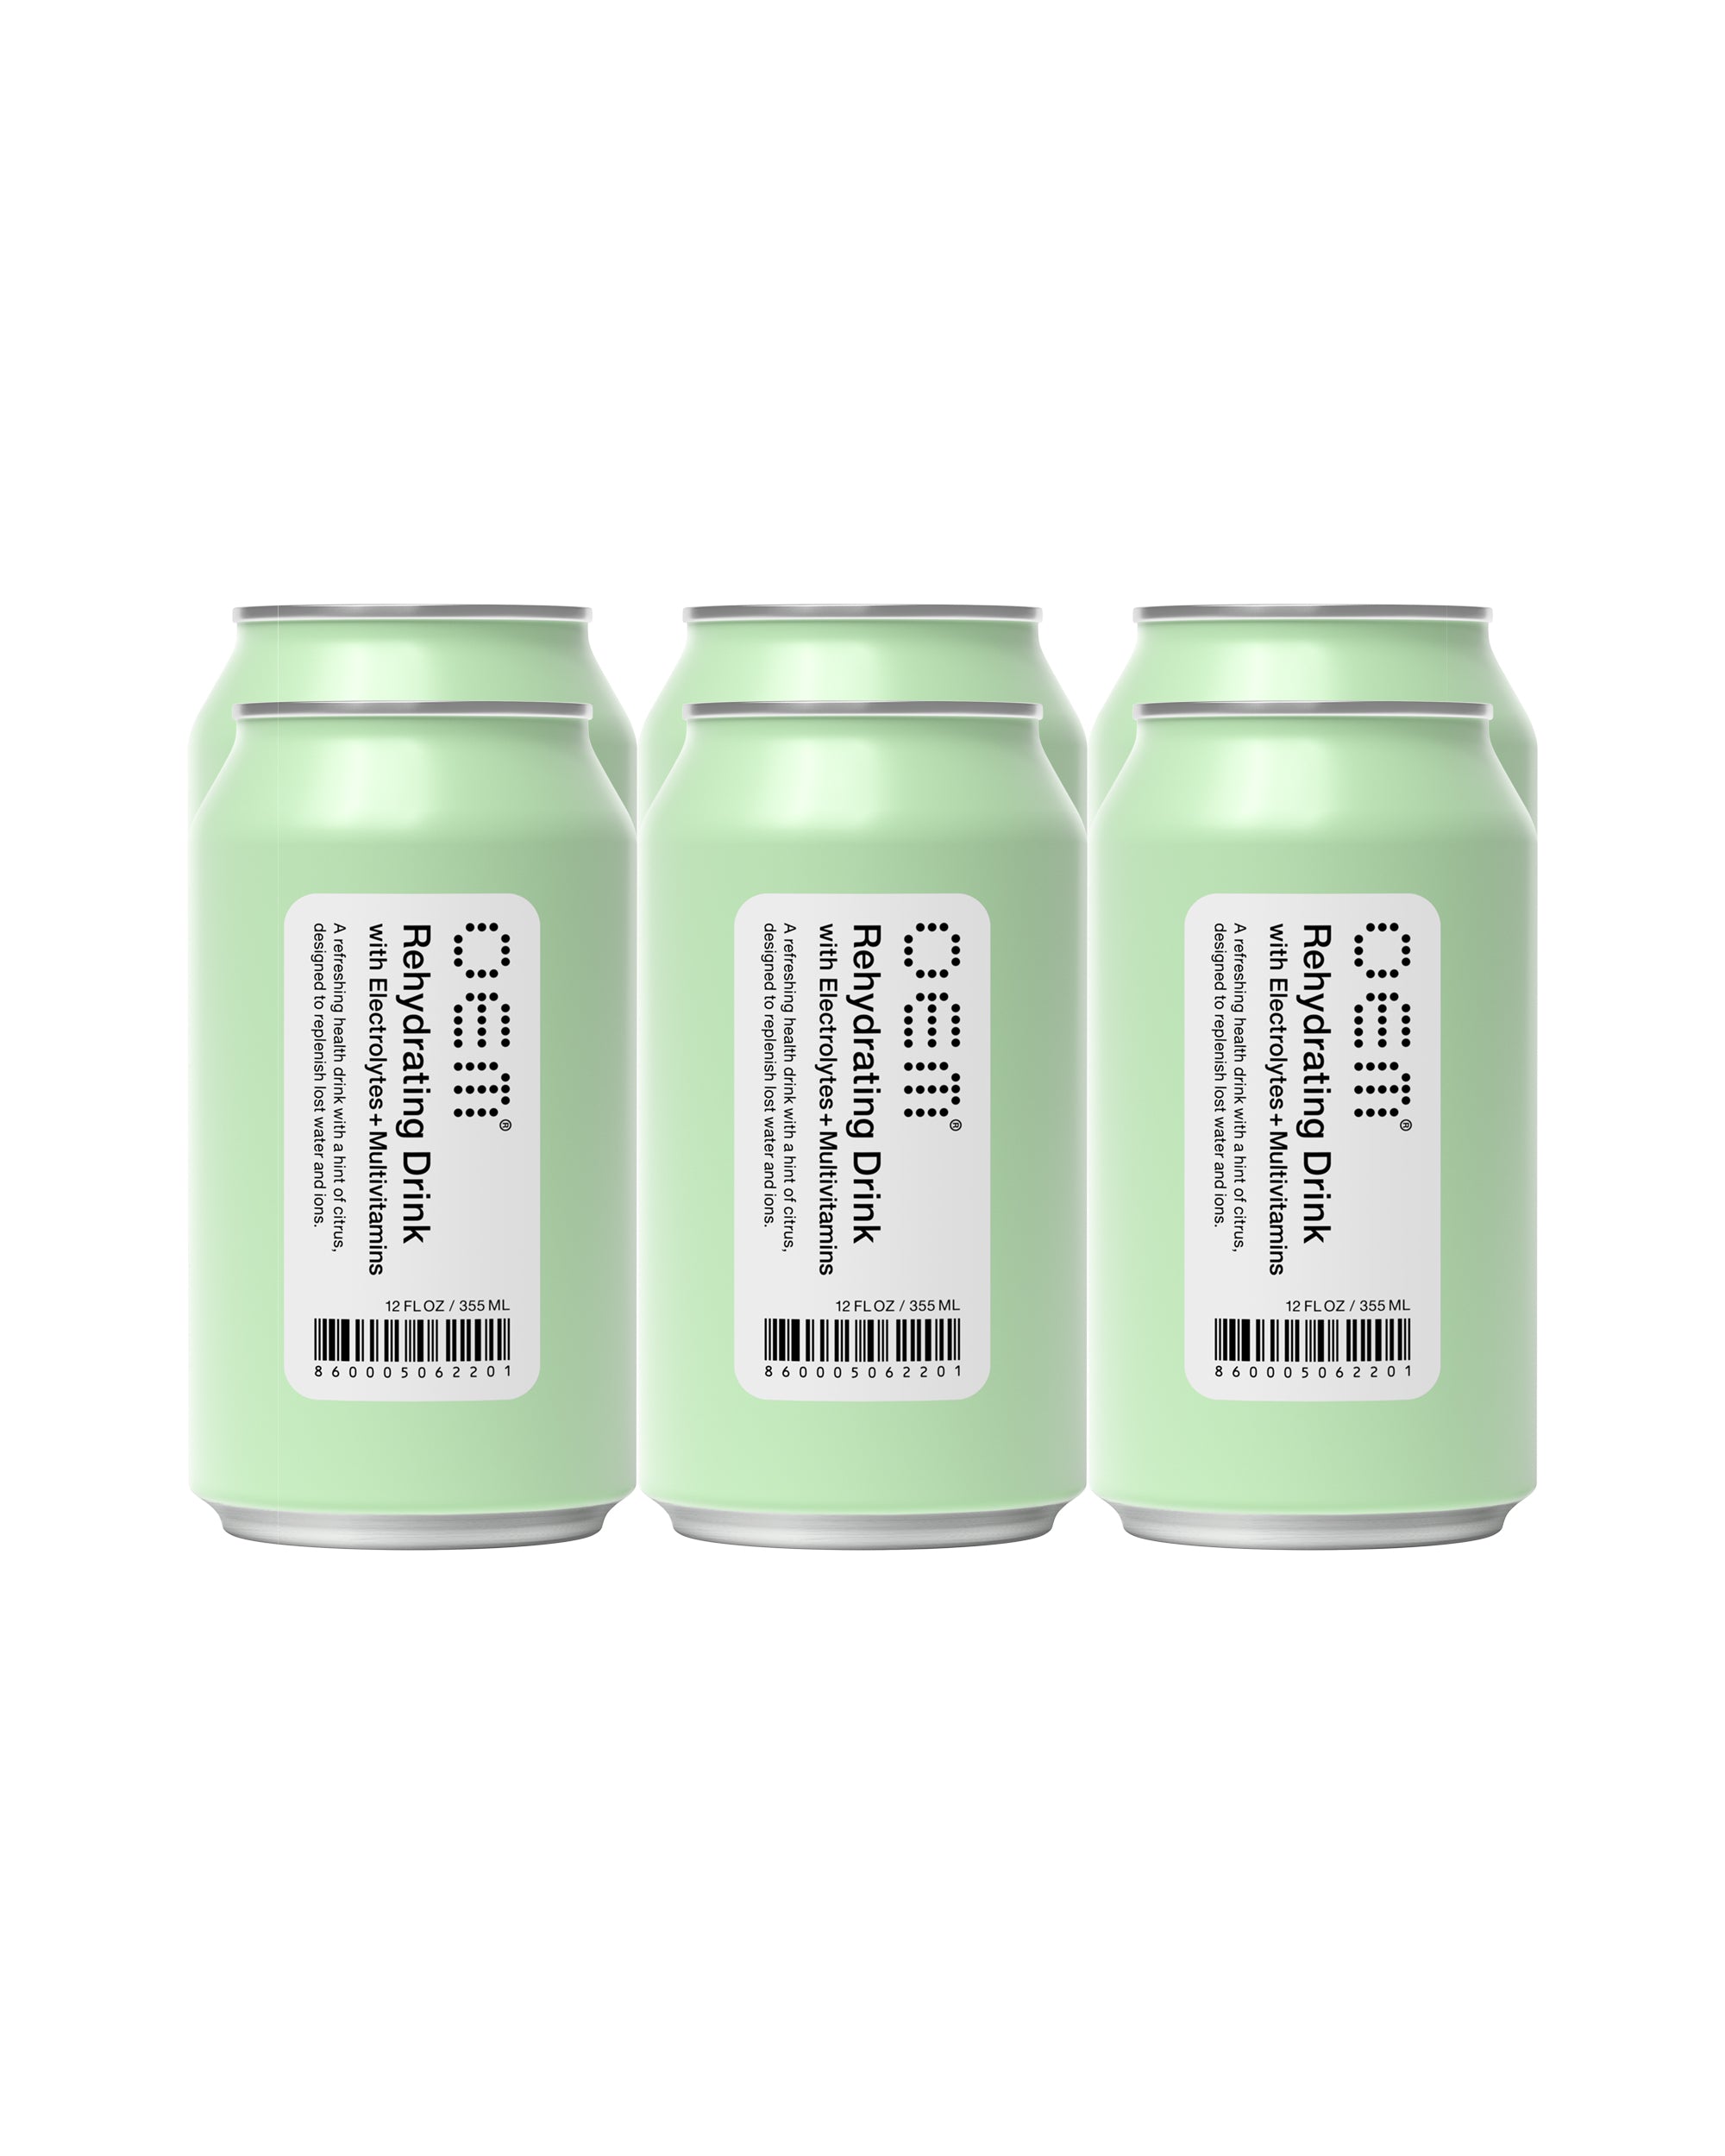 Rehydrating Drink Sample Pack